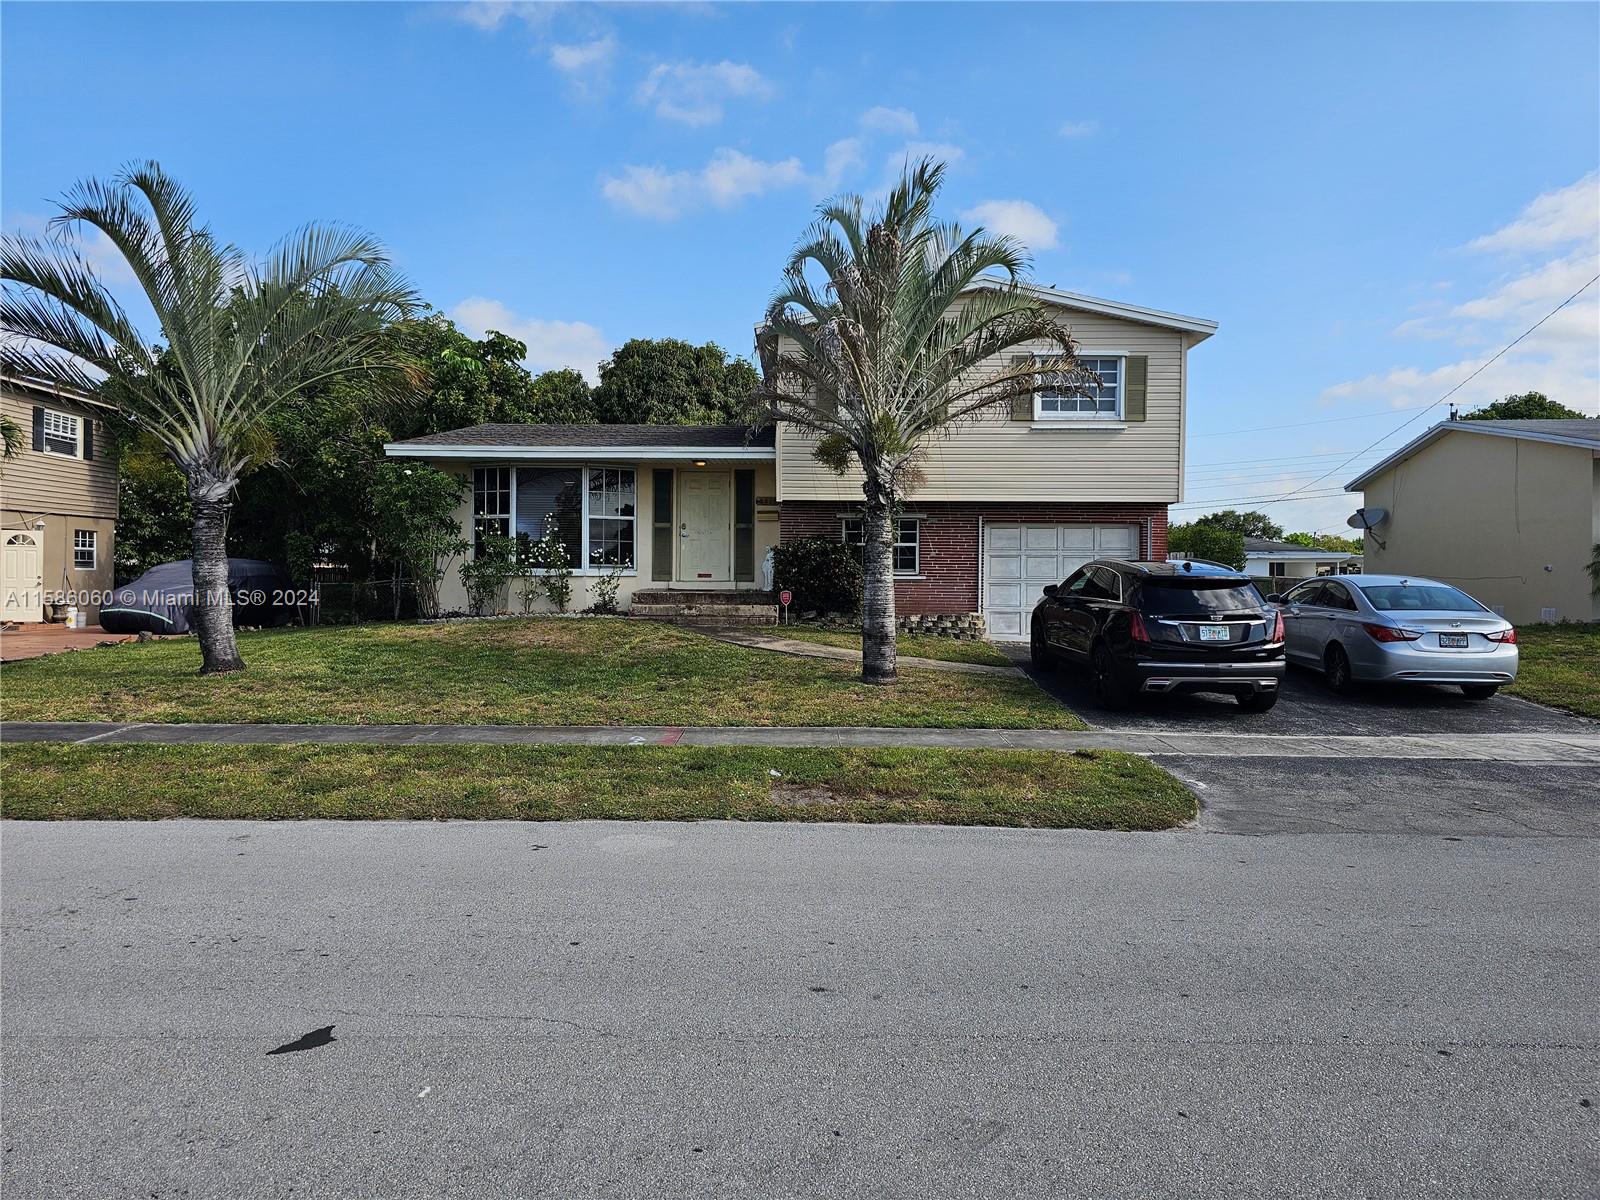 6811 Sw 6th St St, Pembroke Pines, Miami-Dade County, Florida - 4 Bedrooms  
2 Bathrooms - 